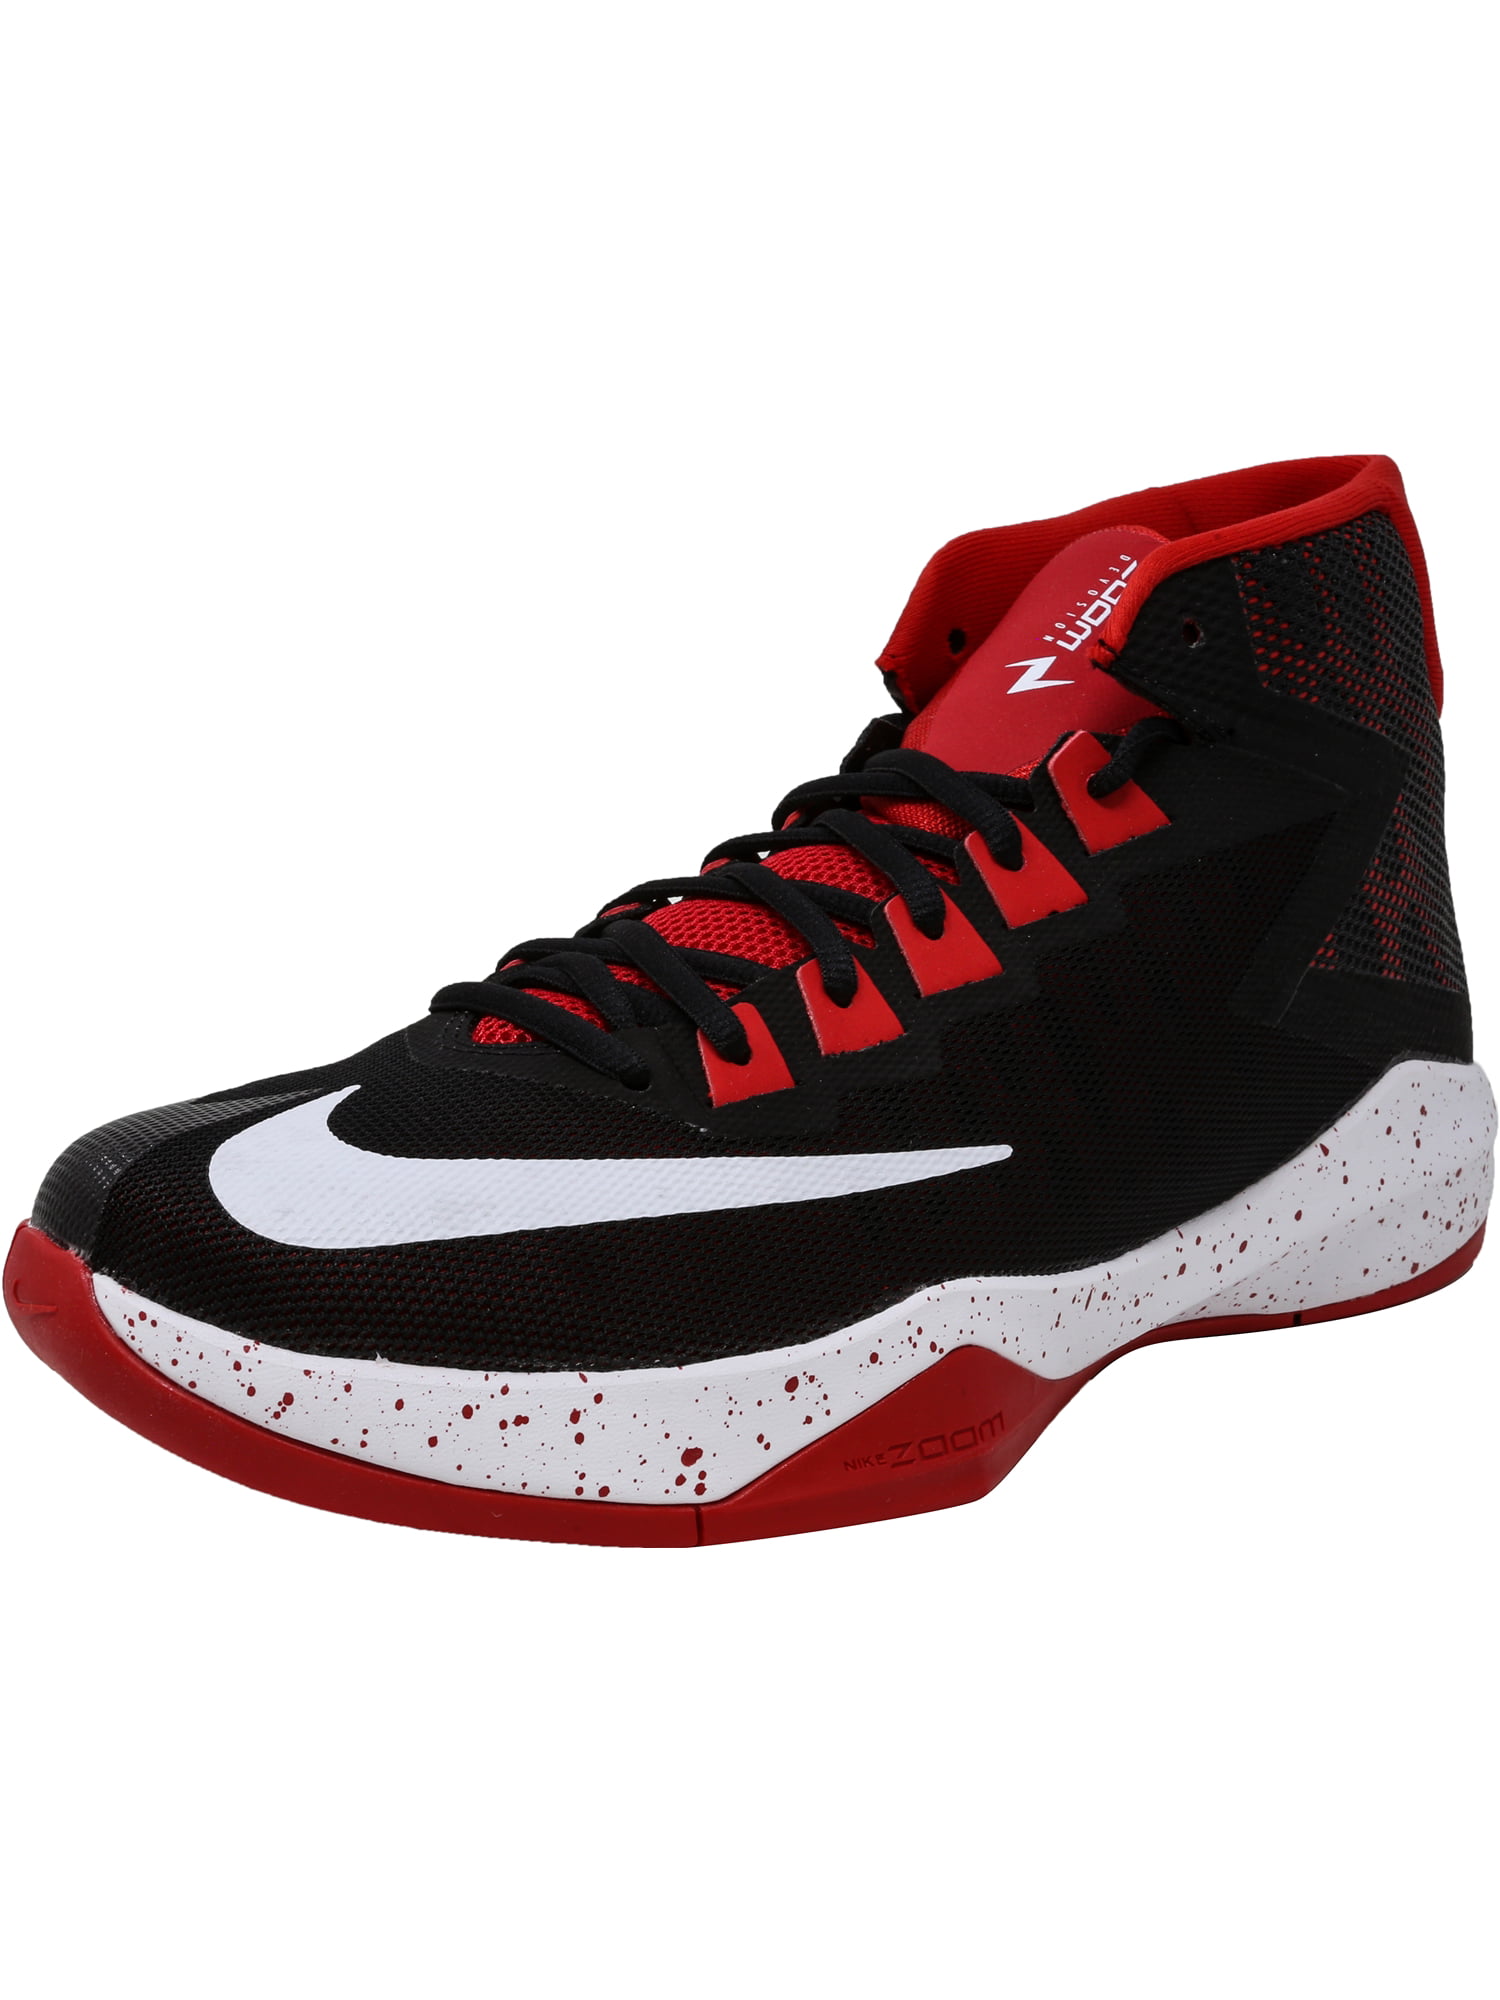 red and black basketball shoes